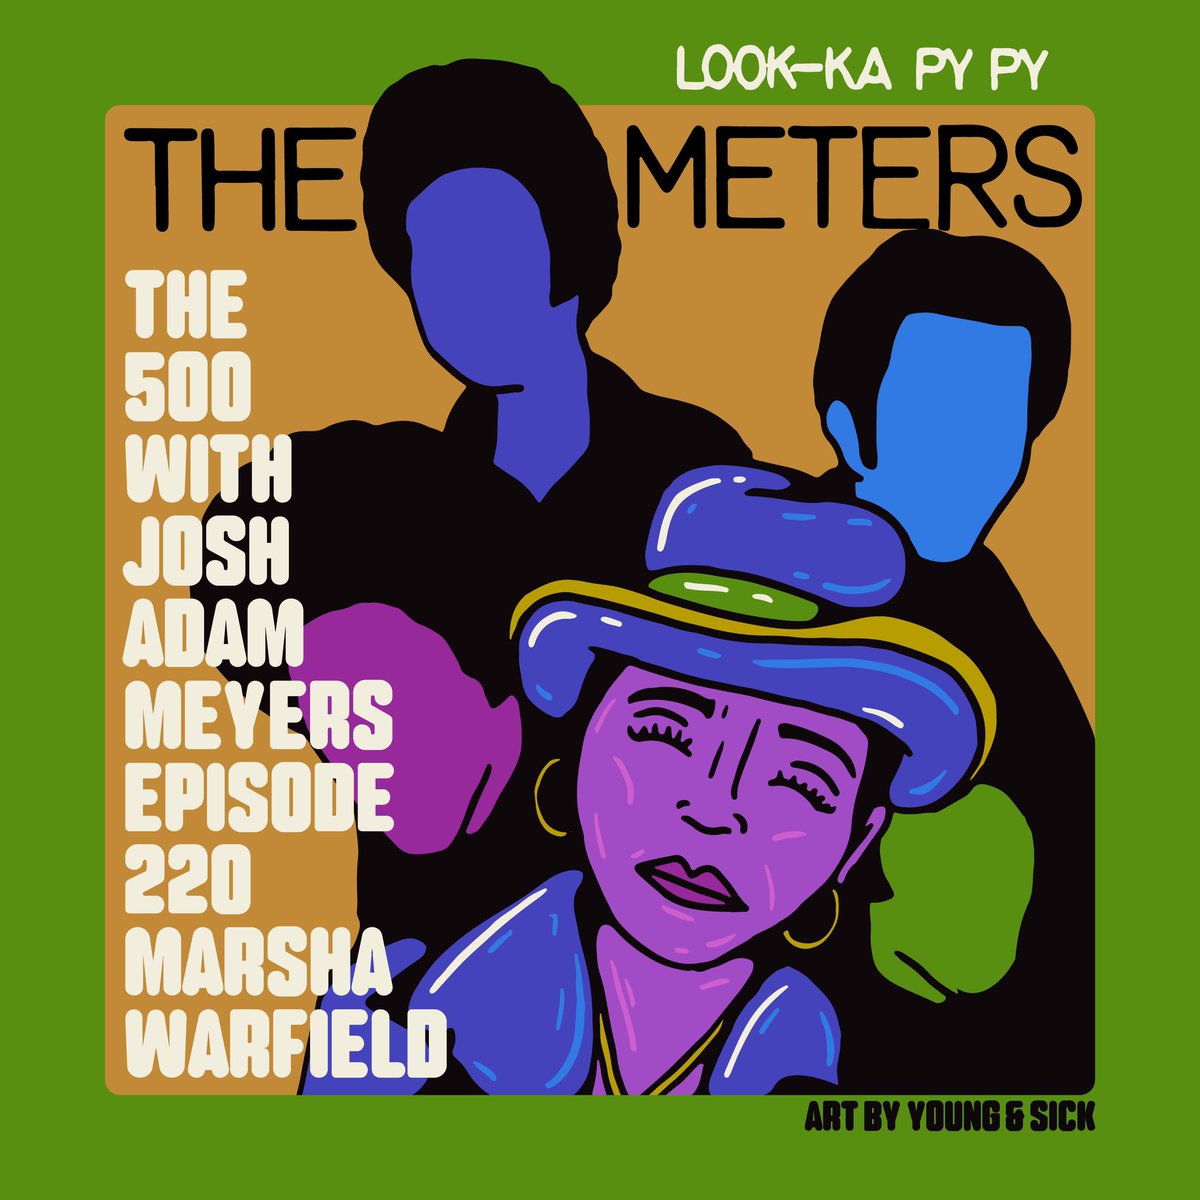 Comedian and actress @marshawarfield gets into the abstract instrumental groove of #TheMeters’ 1970 album Look-Ka Py Py. Art by @youngandsick